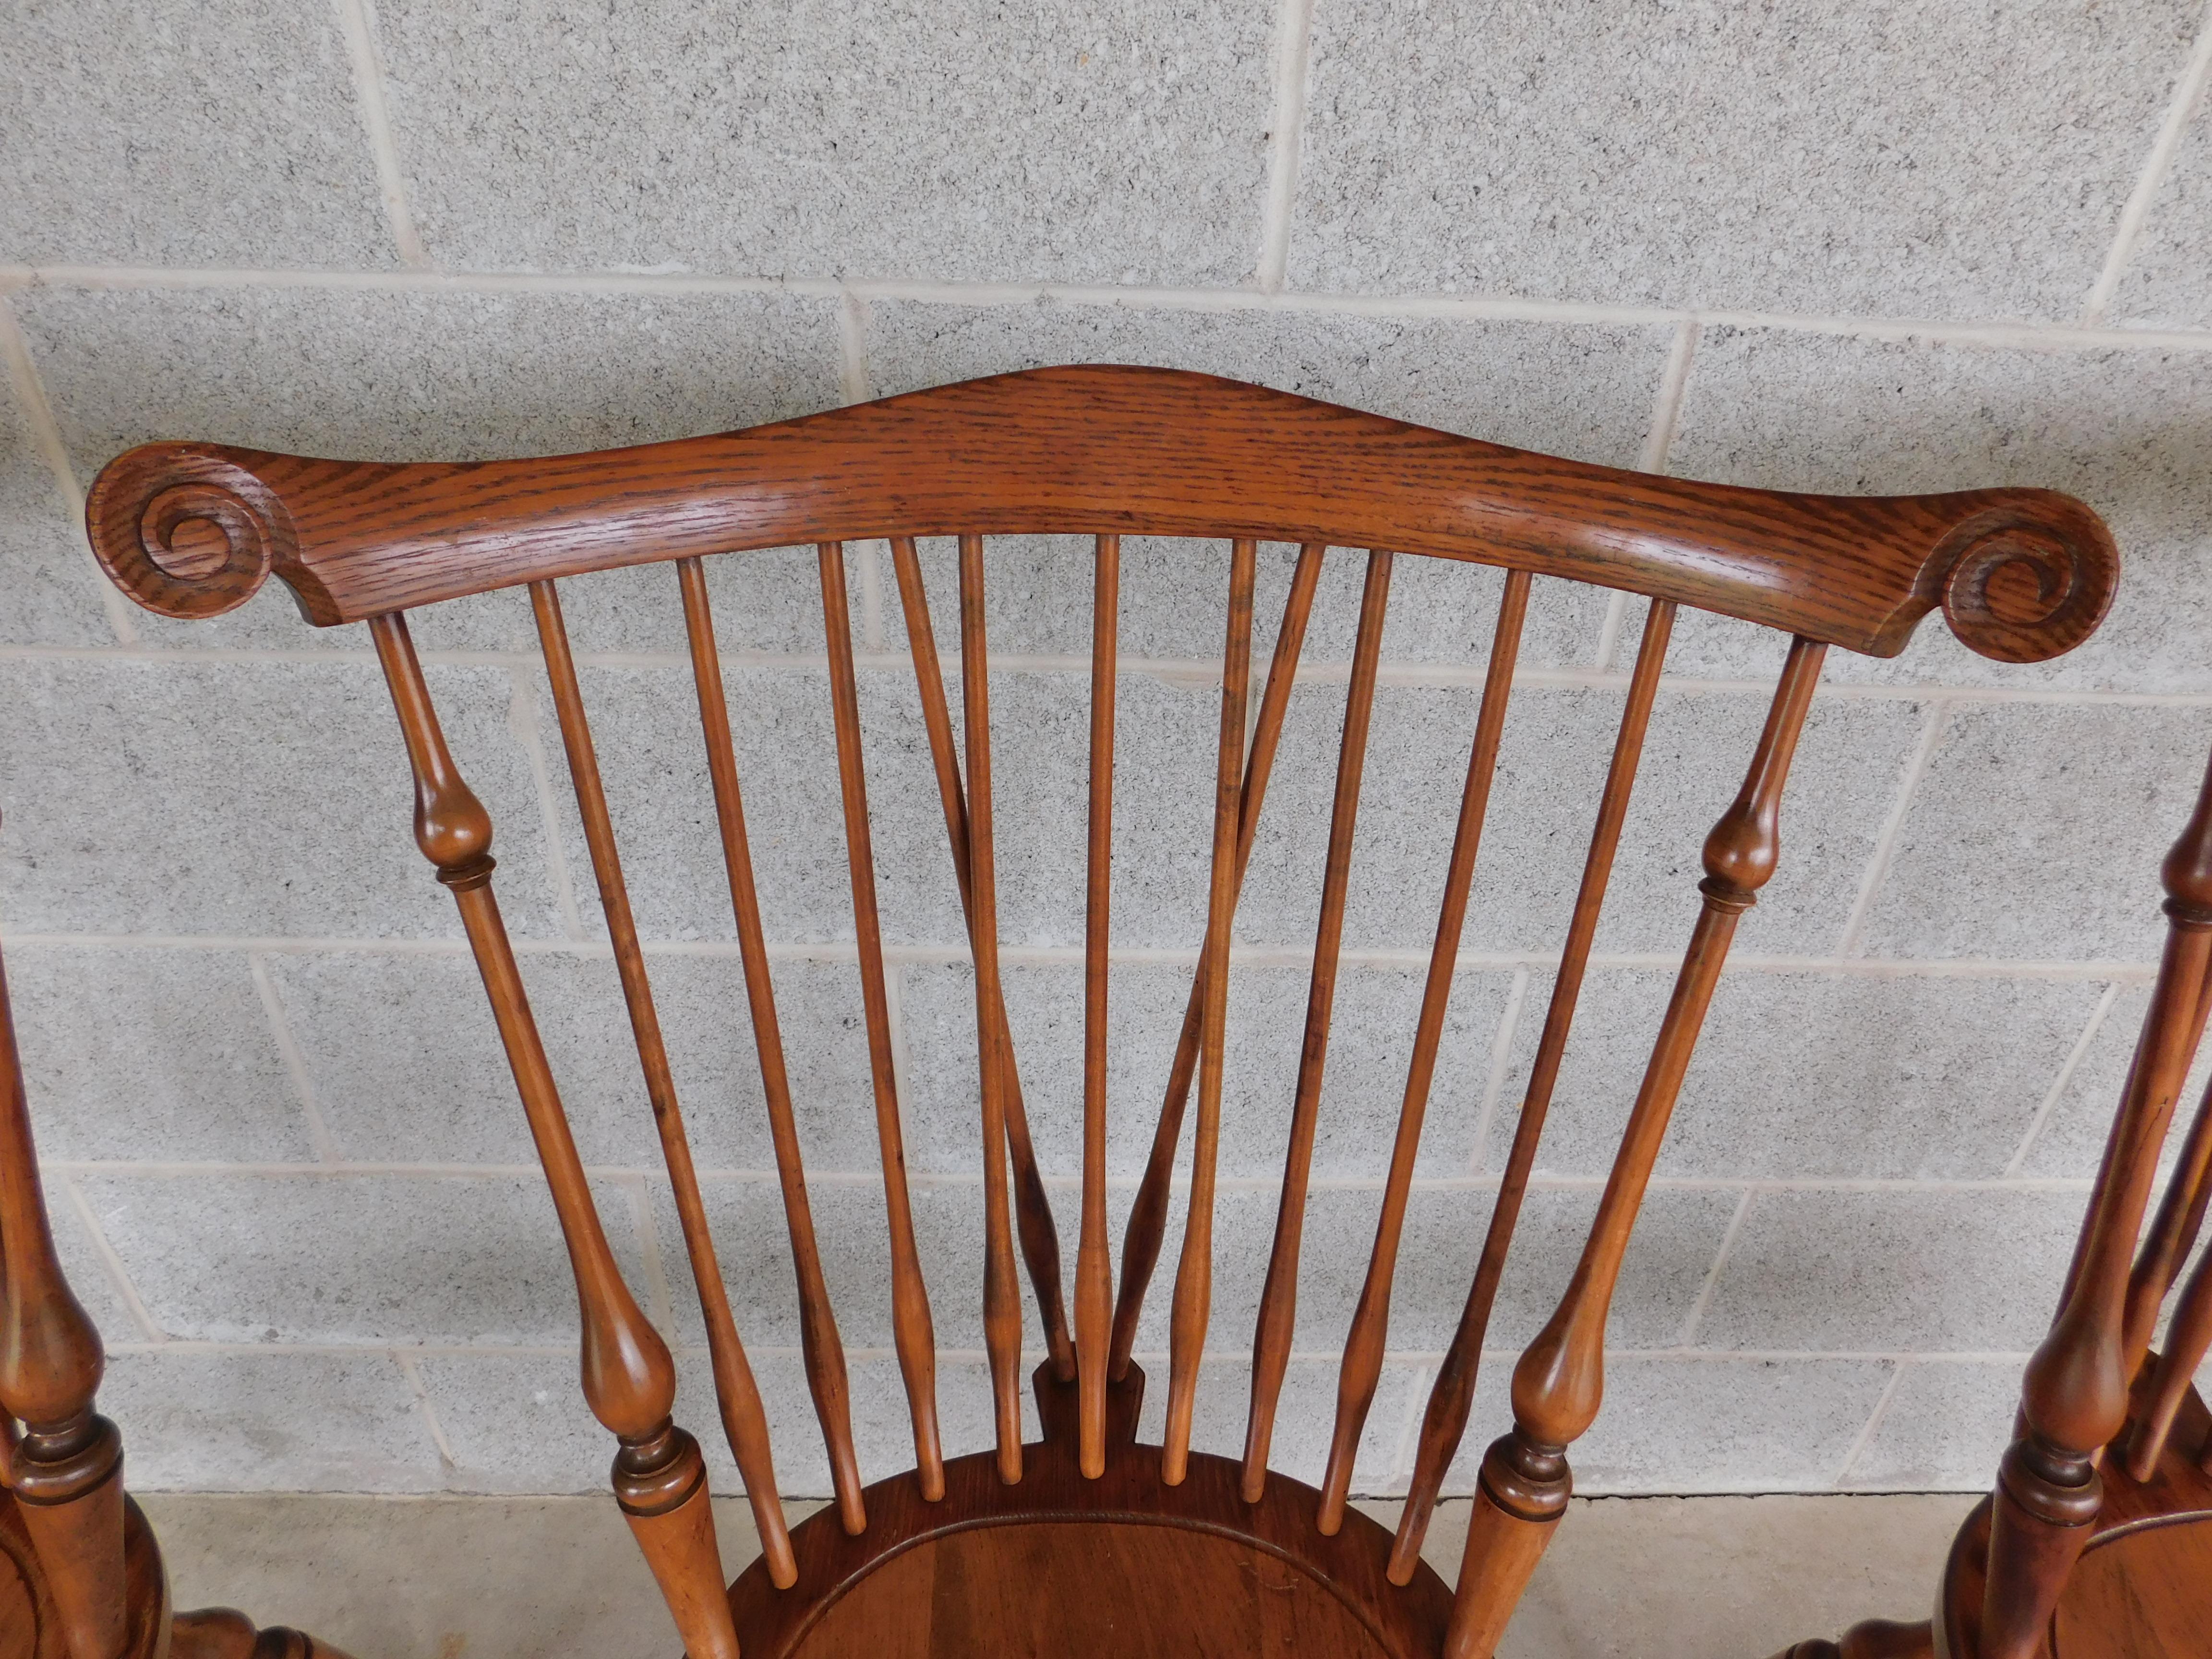 Wood Wallace Nutting Brace Back Windsor Side Chairs #326 - Set of 4